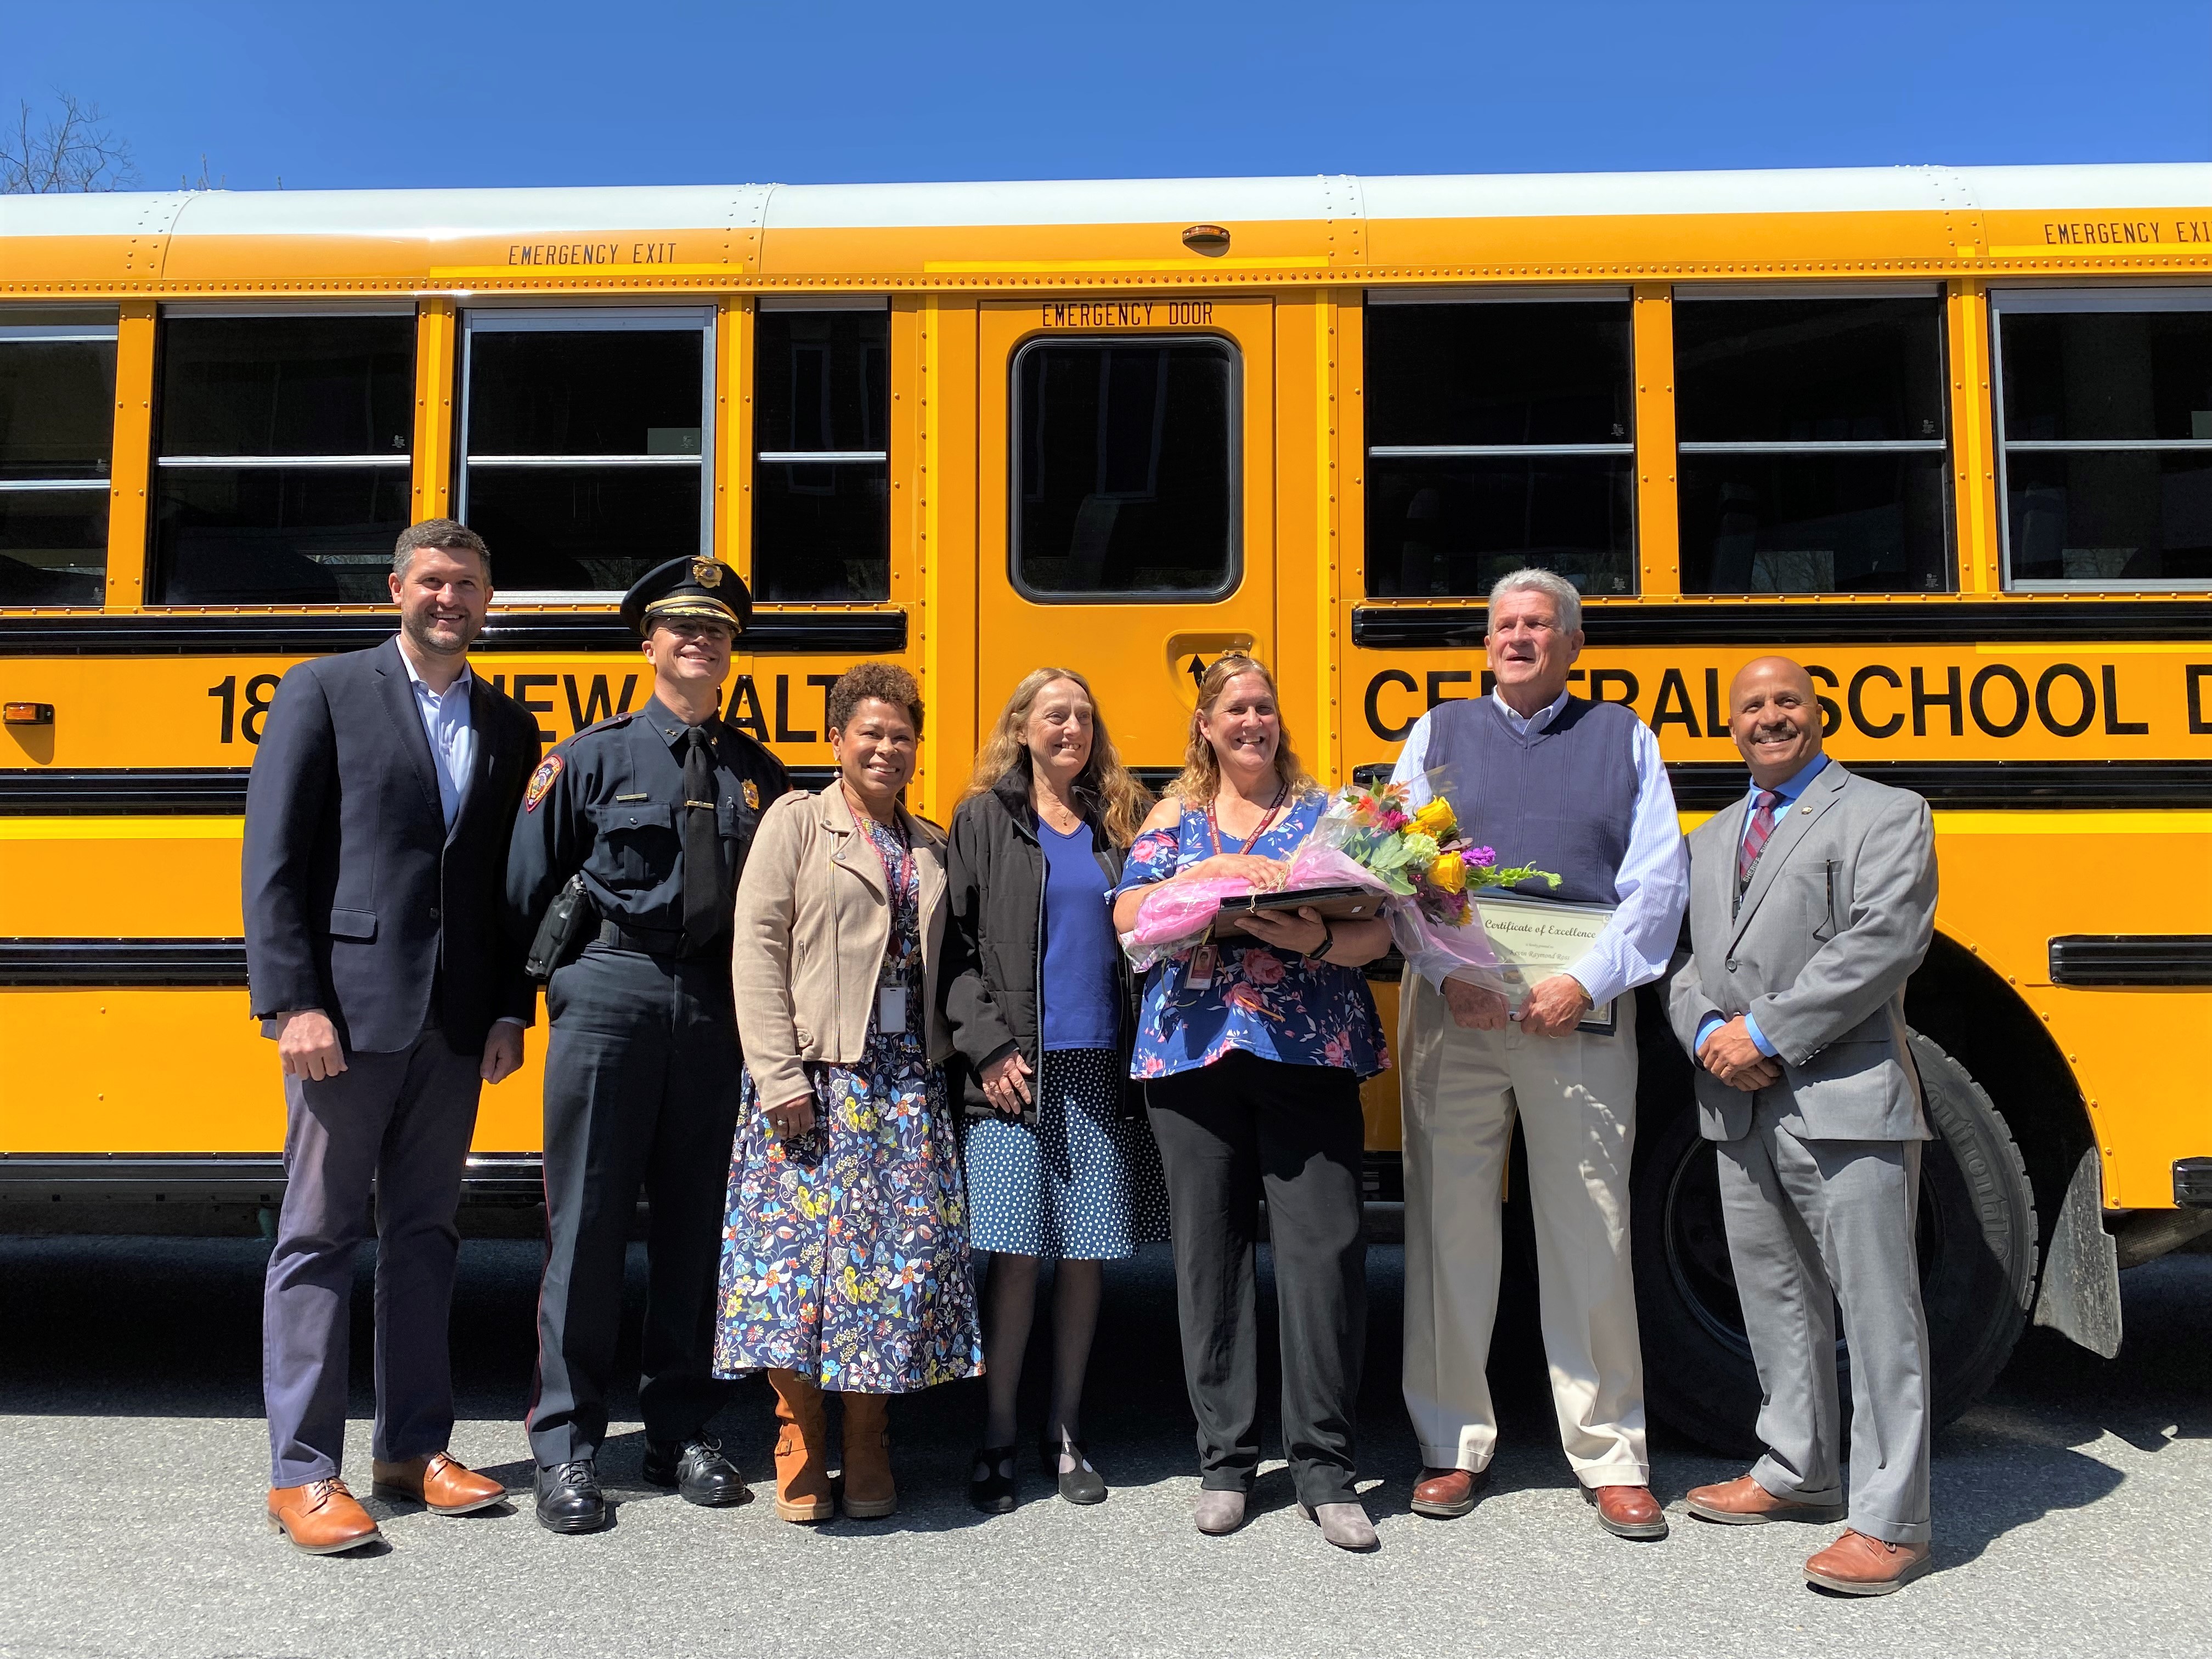 (left to right): Ulster County Executive Pat Ryan, New Paltz Chief of Police Robert J. Lucchesi, New Paltz Central School District Superintendent Angela Urbina Medina, NPCSD Director of Transportation Maureen Ryan, Lisa Haynes, Kevin Ross, Ulster County Sheriff Juan Figueroa 